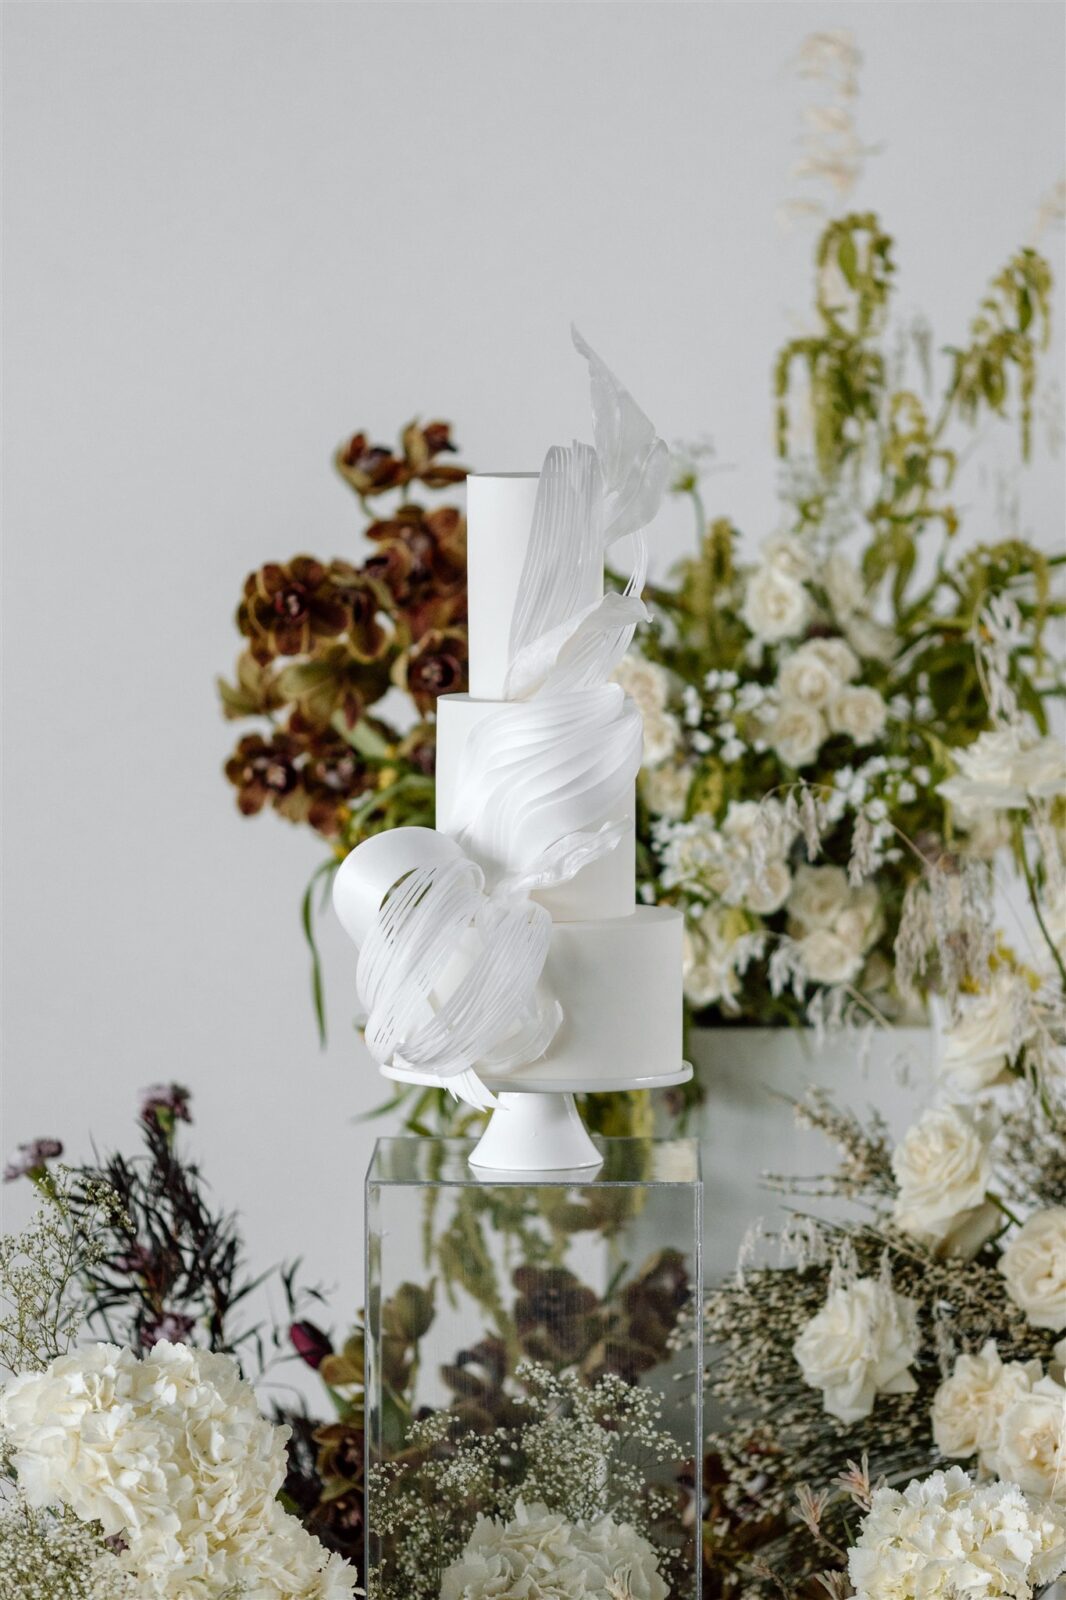 Elegant and contemporary 3-teired wedding cake designed by Rain Bake Shop in Vancouver, BC. Chic and minimalistic wedding inspiration. 